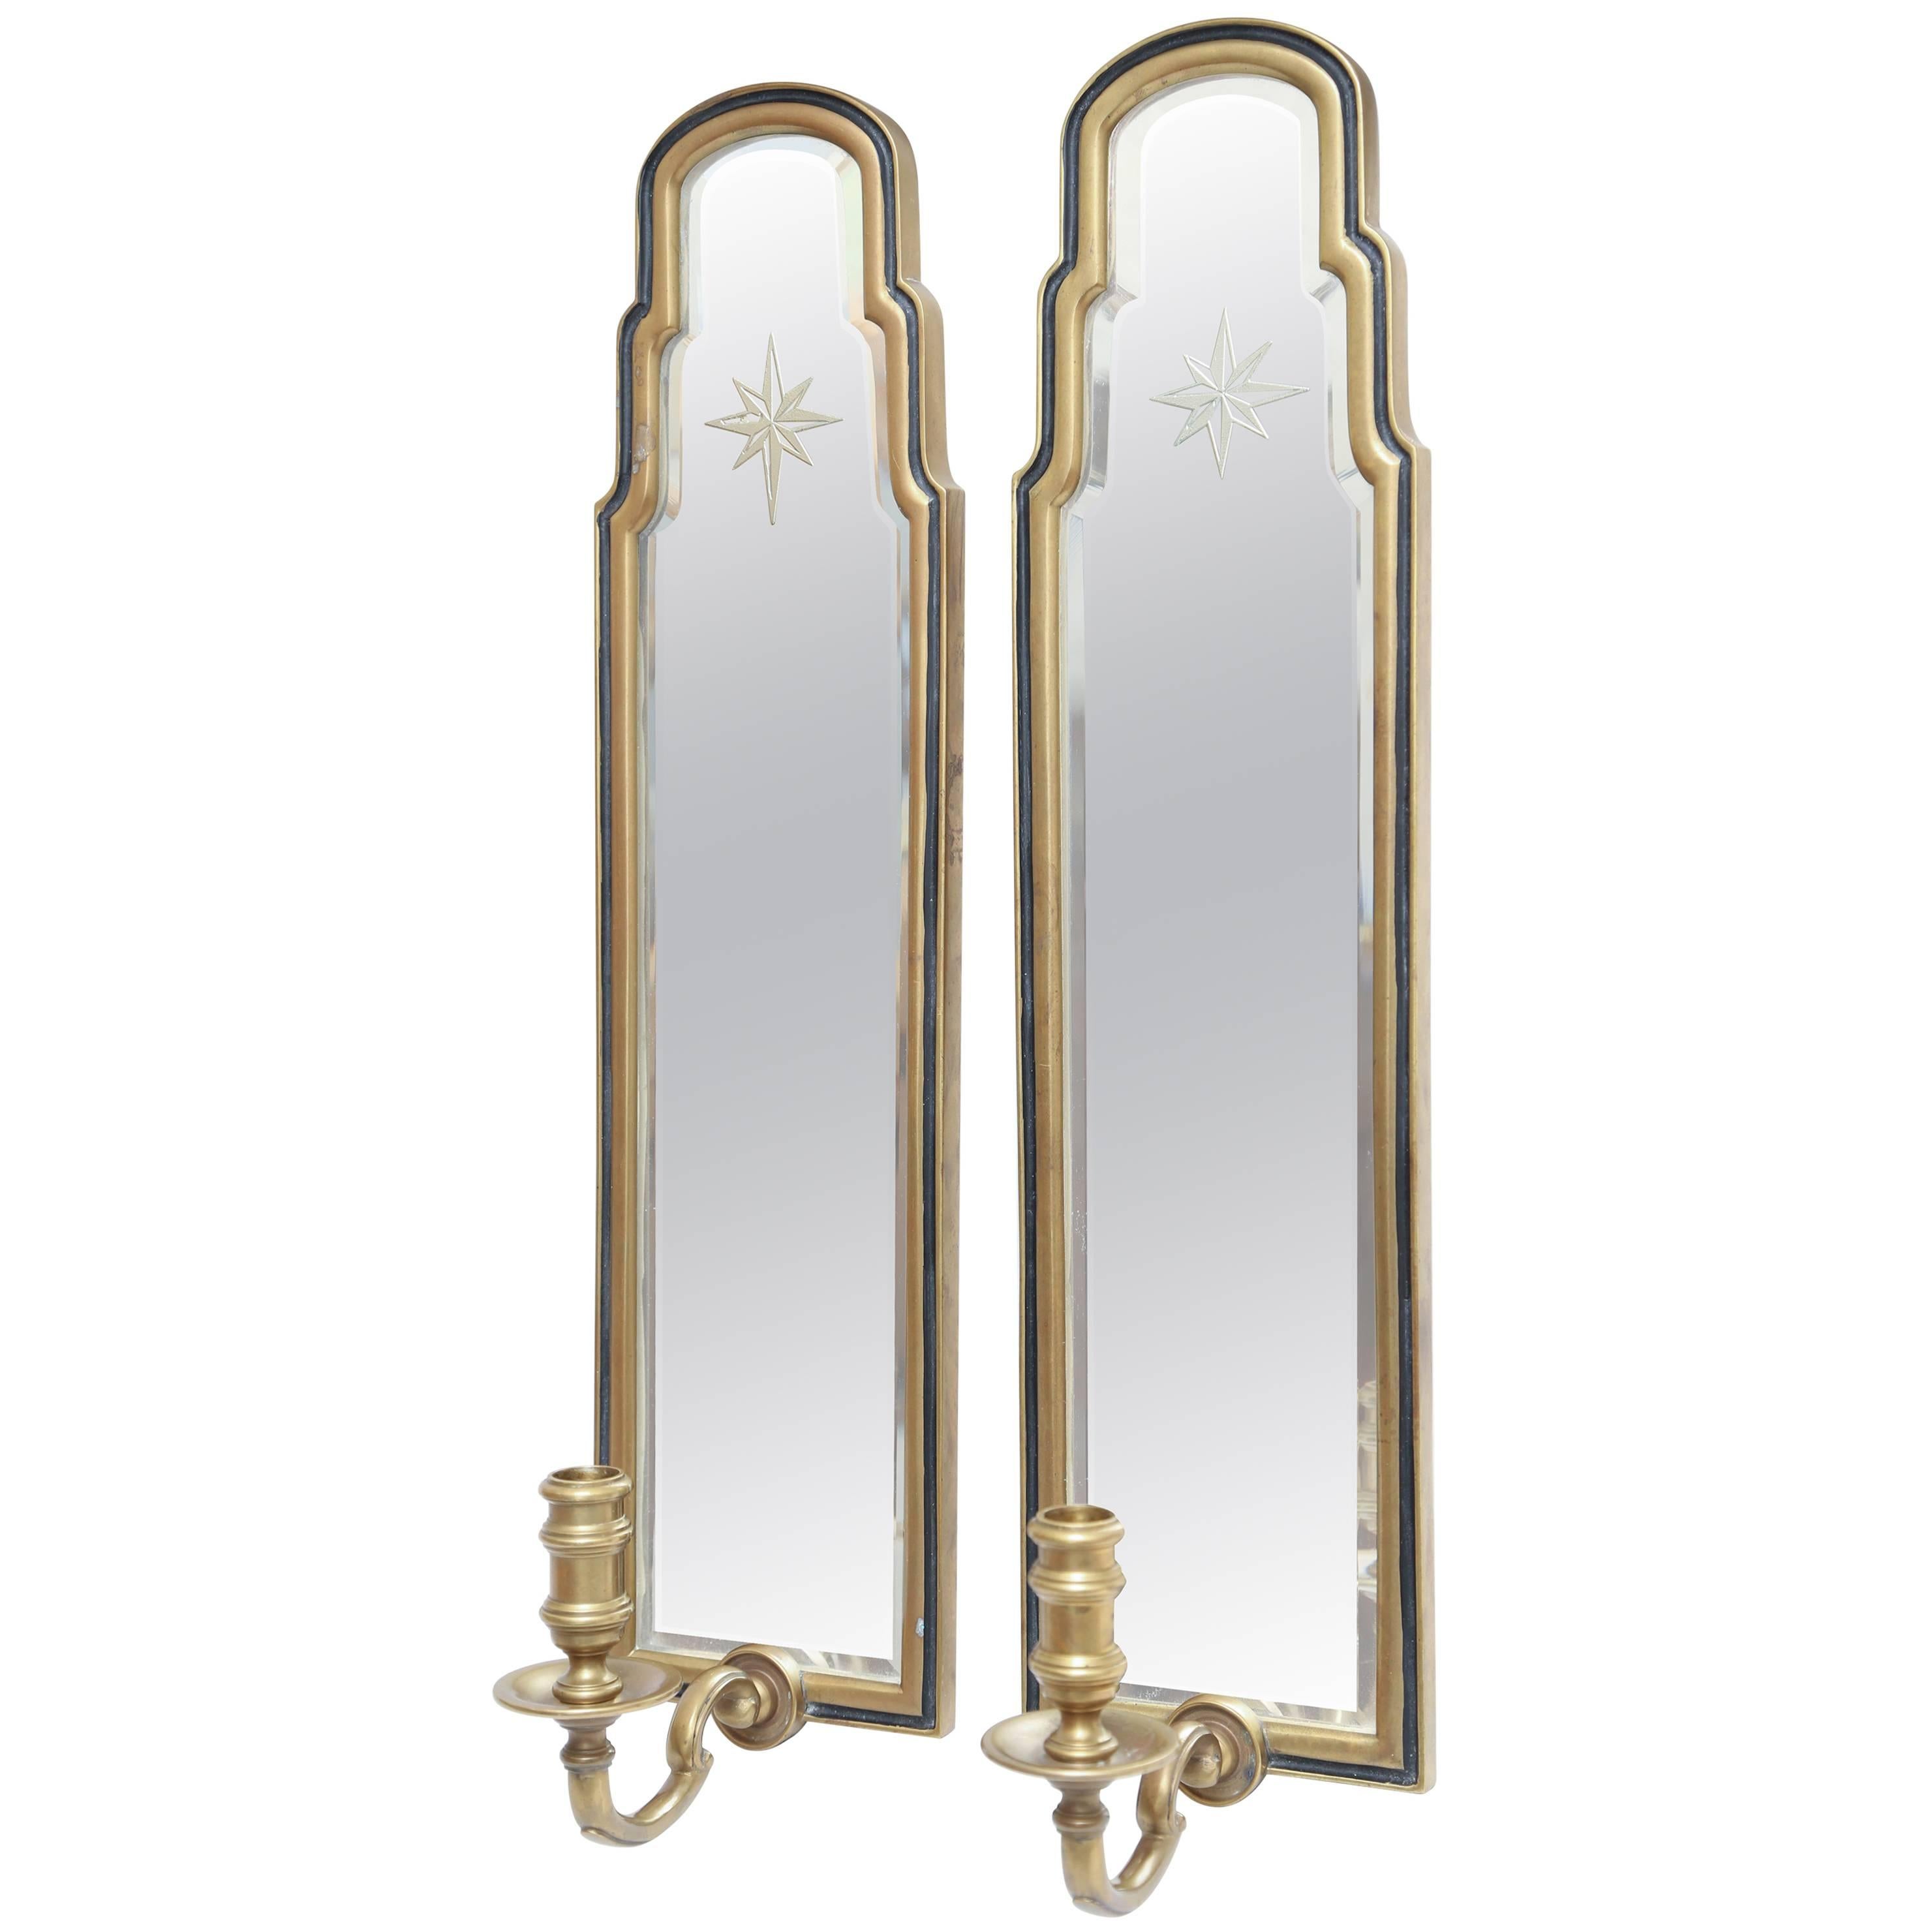 Pair of Etched Starburst Mirrored Sconces by Chapman